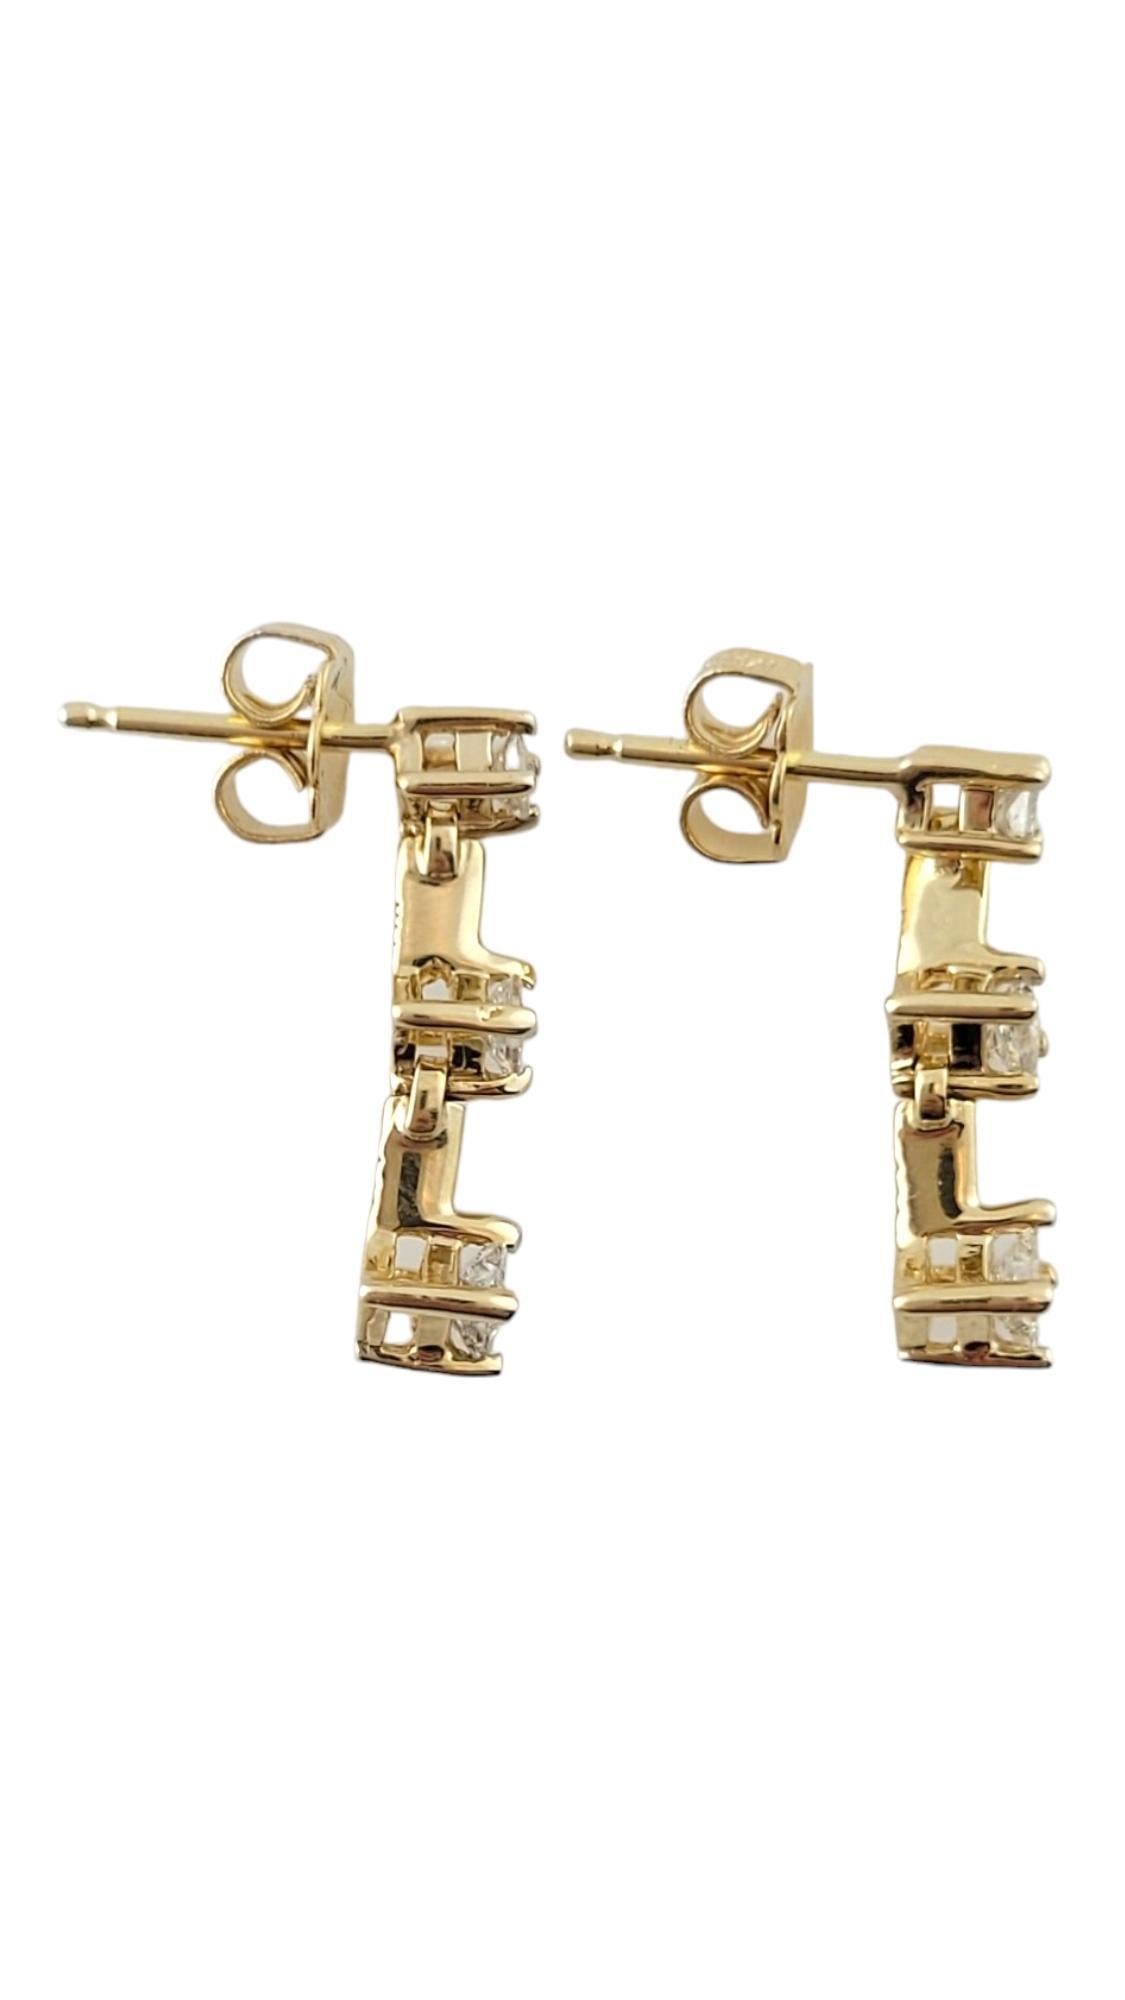 Vintage 14K Yellow Gold Dangle Diamond Earrings

These beautiful 14K gold earrings would look gorgeous on anybody and have 3 sparkling princess cut diamonds!

Approximate total diamond weight: .48 cts

Diamond color: G-H

Diamond clarity: